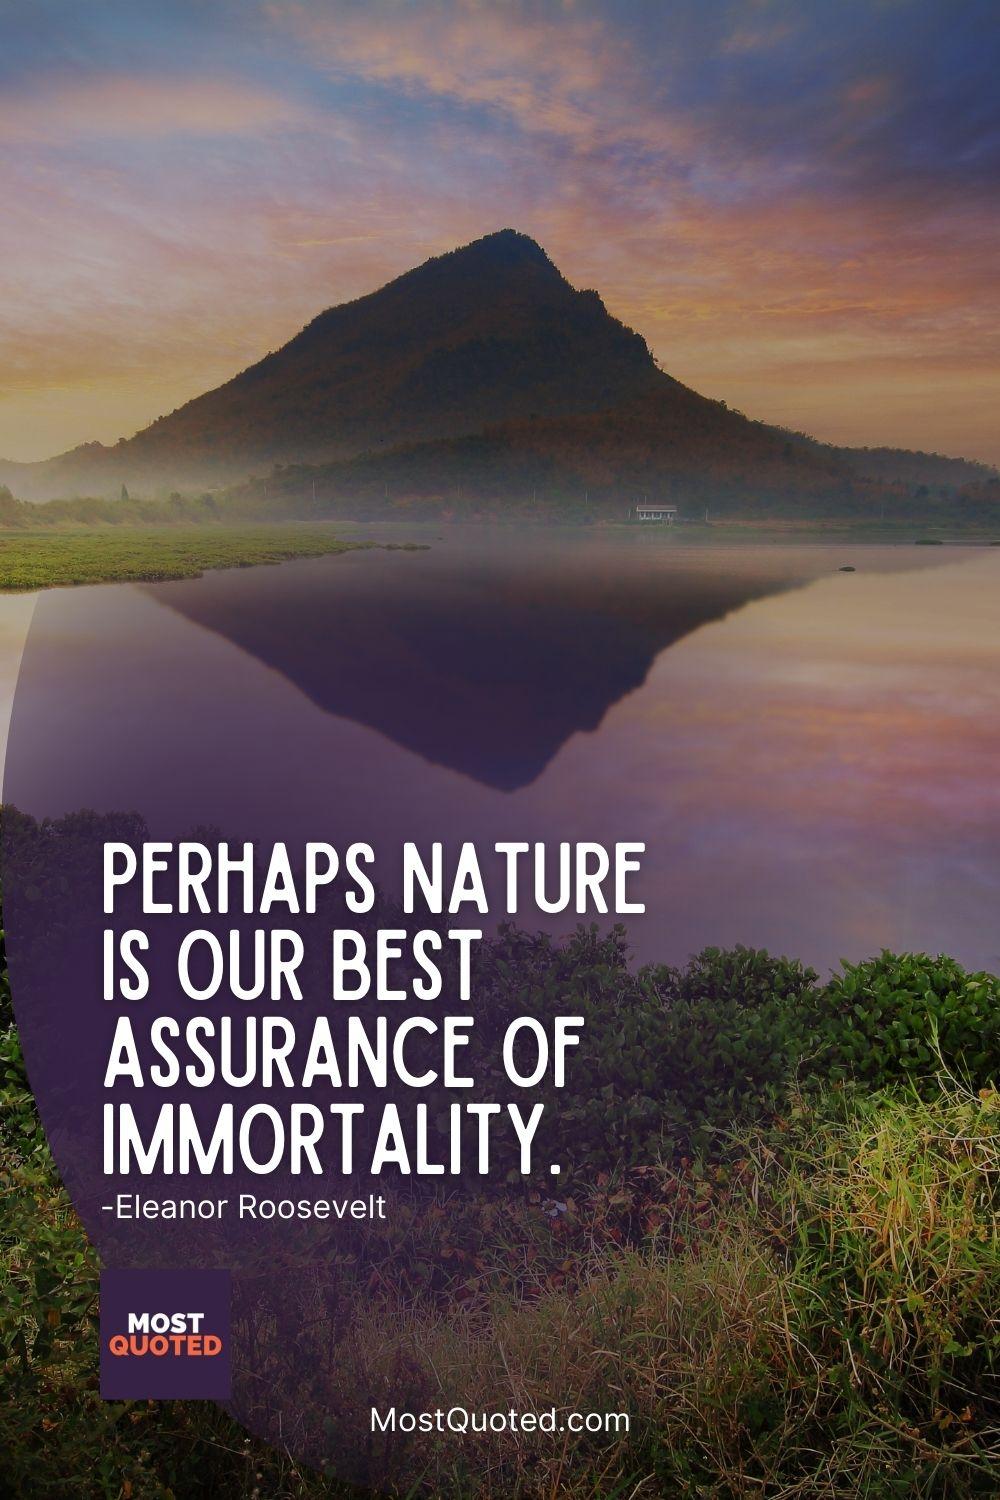 Perhaps nature is our best assurance of immortality. - Eleanor Roosevelt